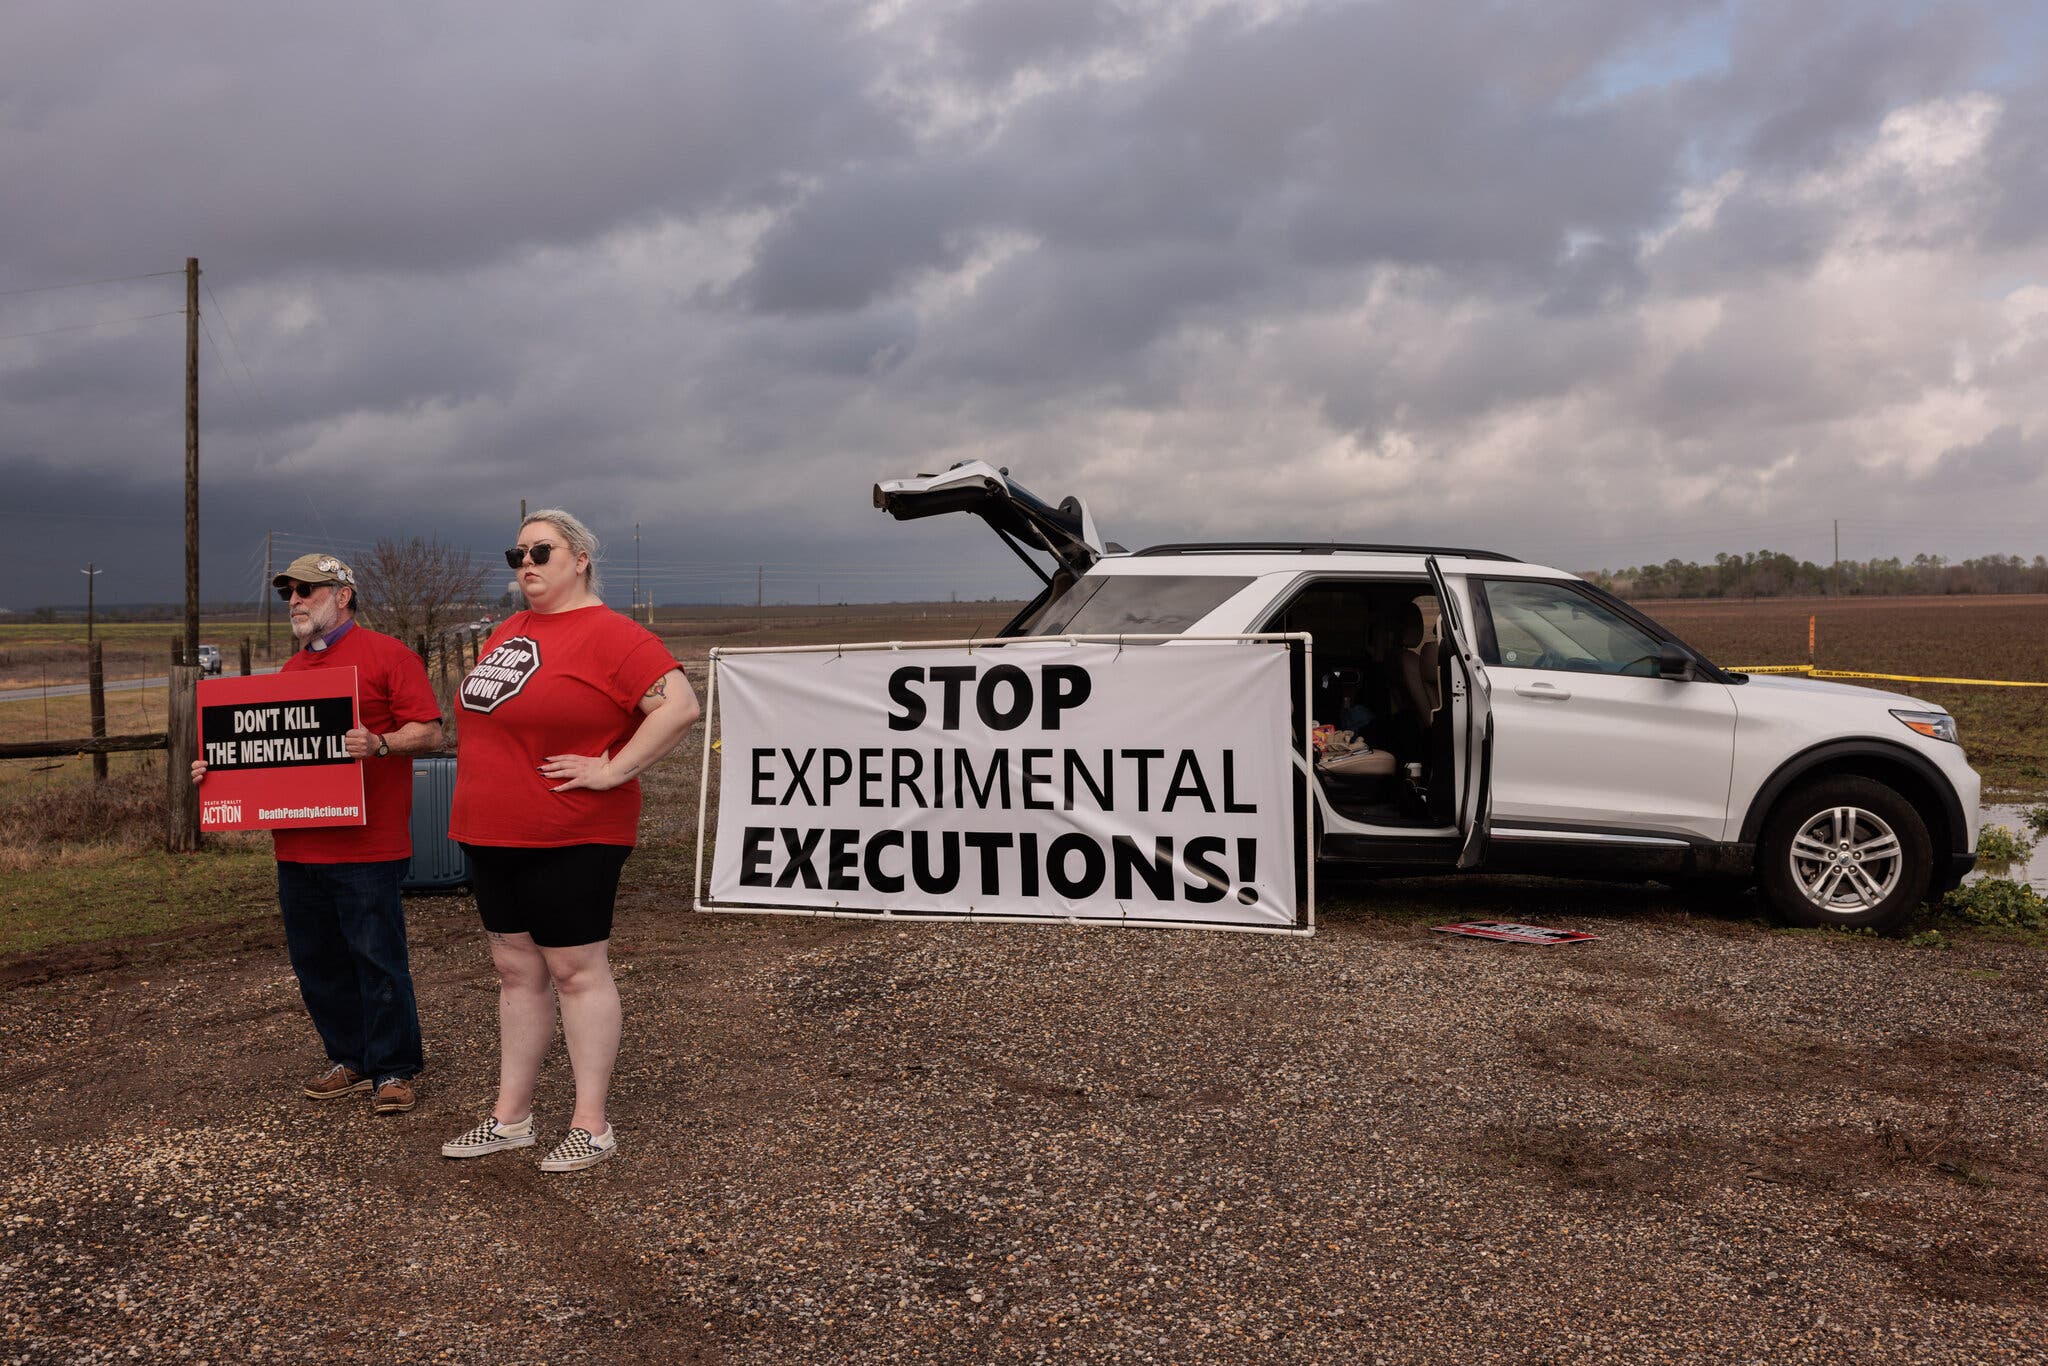 Alabama Carries Out First U.S. Execution by Nitrogen